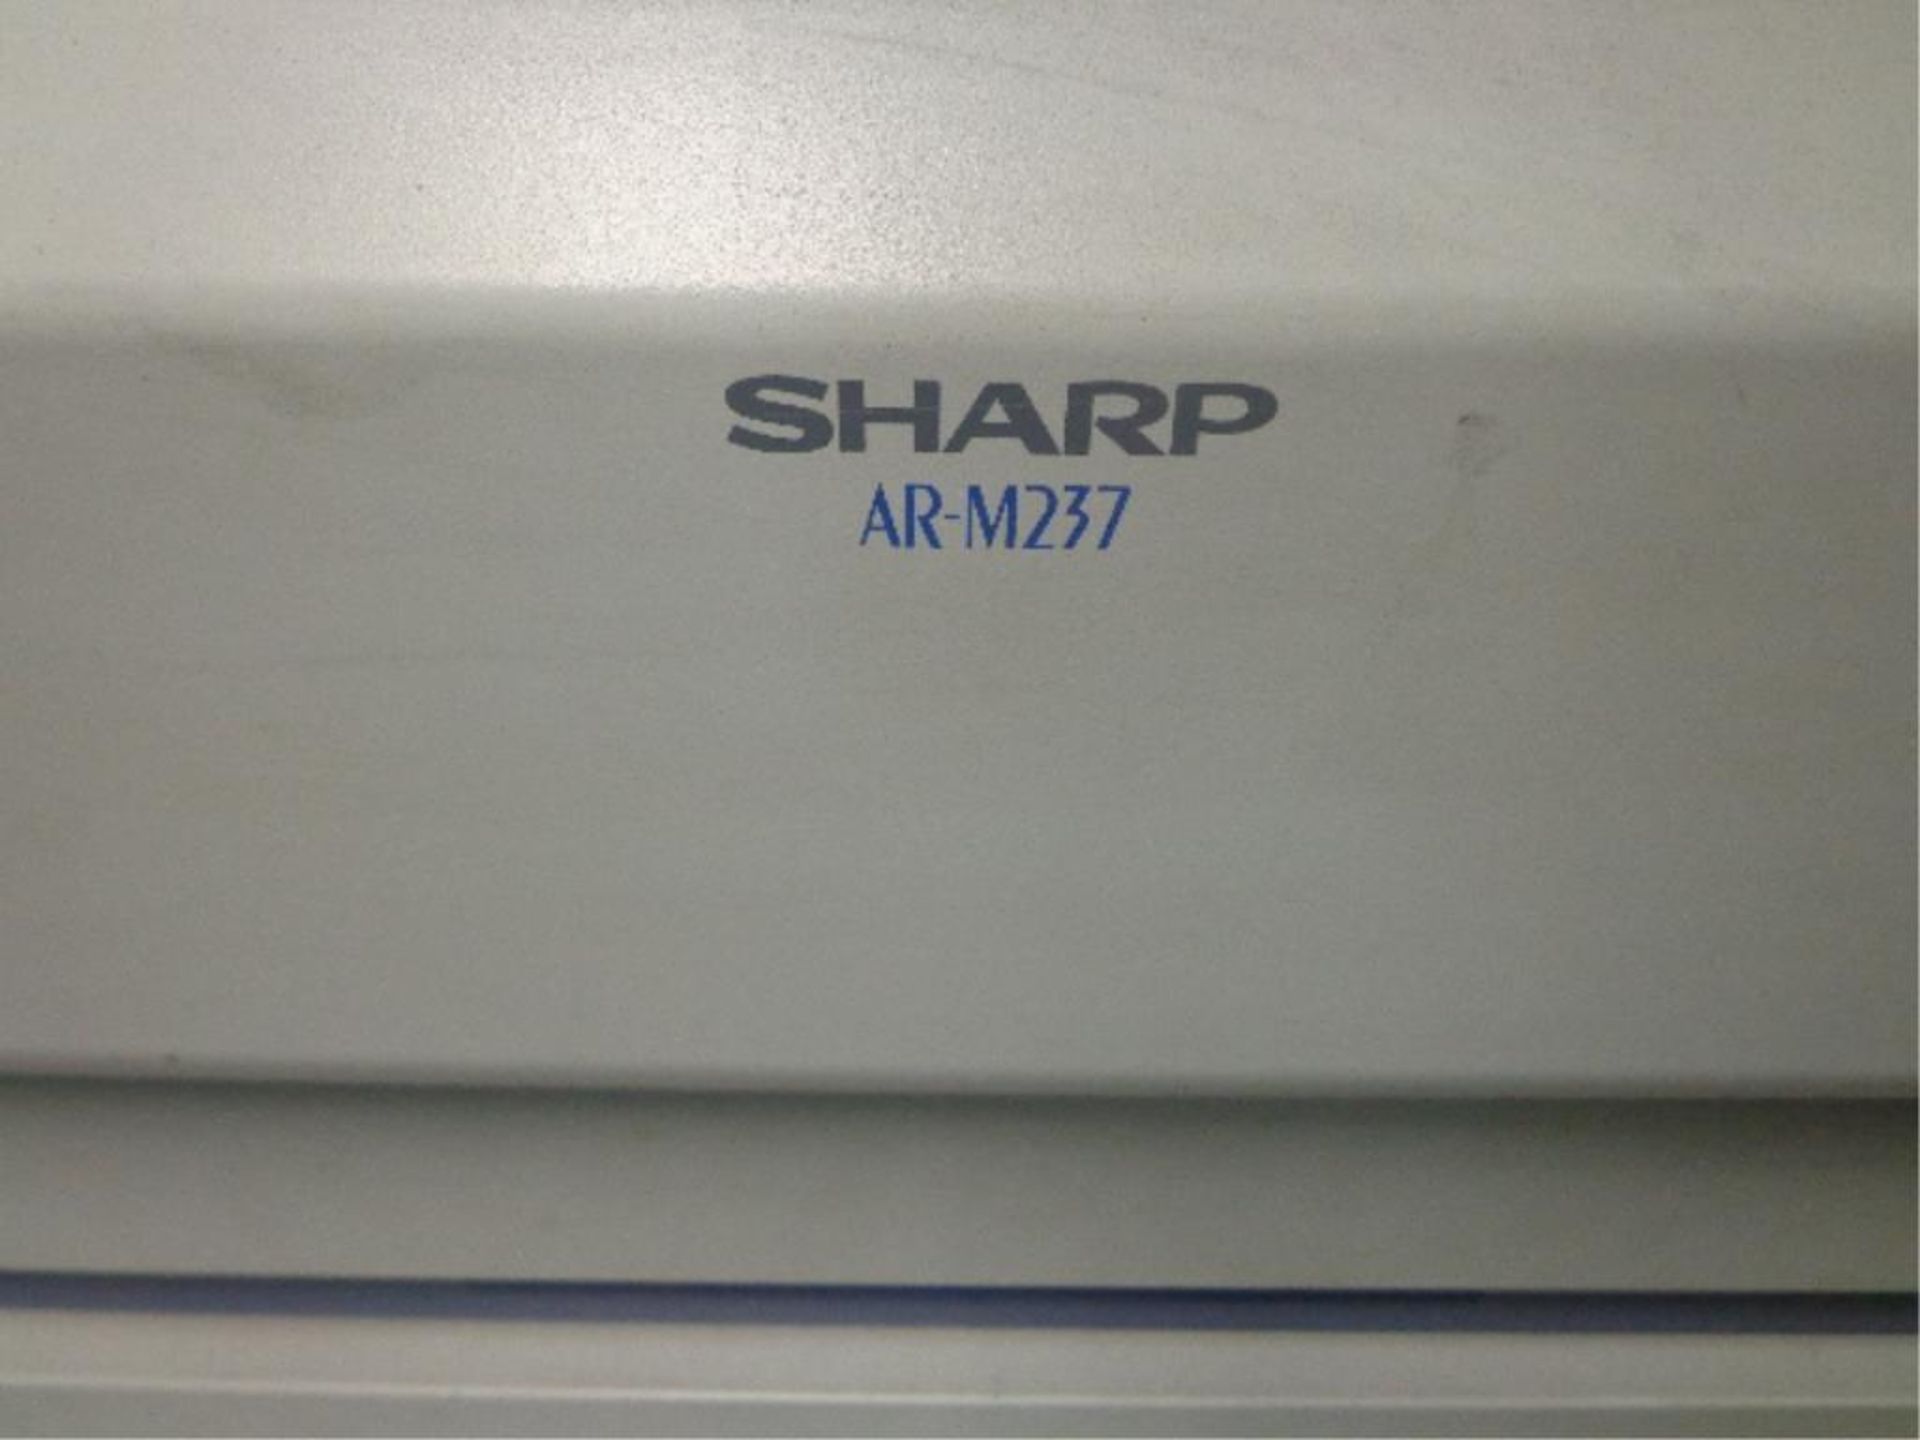 Sharp All in One Printer - Image 2 of 2